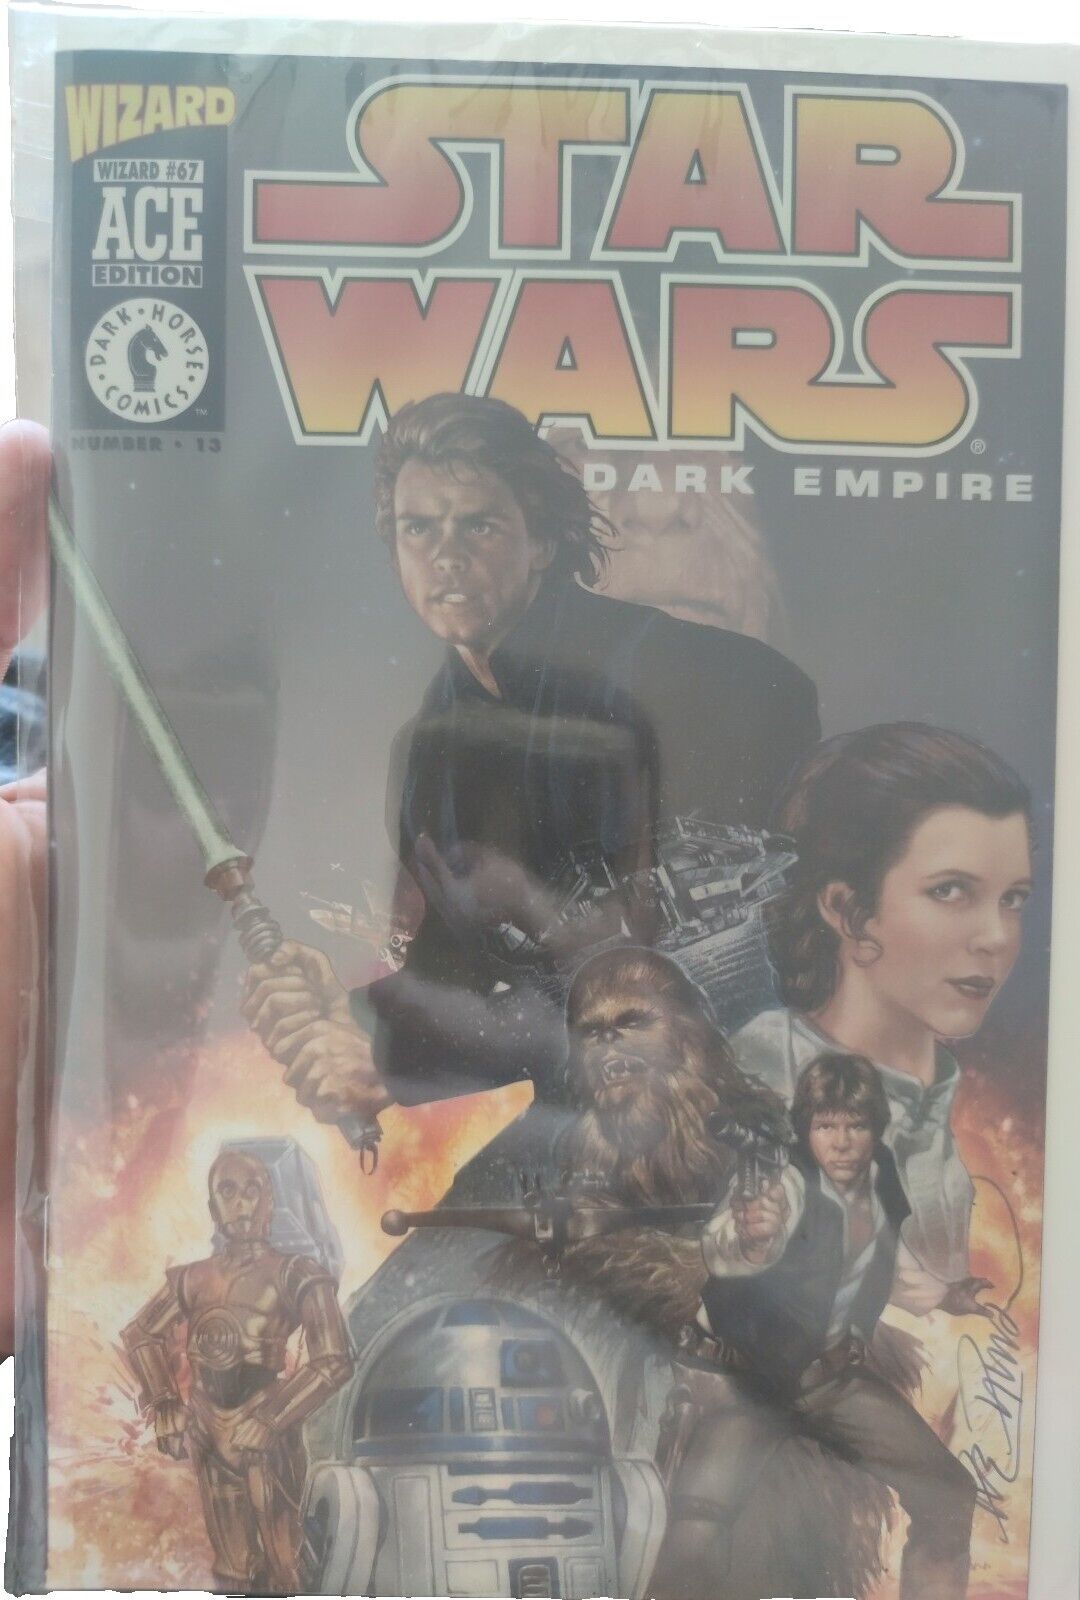 Star Wars: Dark Empire #1 - Wizard Ace Edition Signed By Artist Dave Dorman- DHC